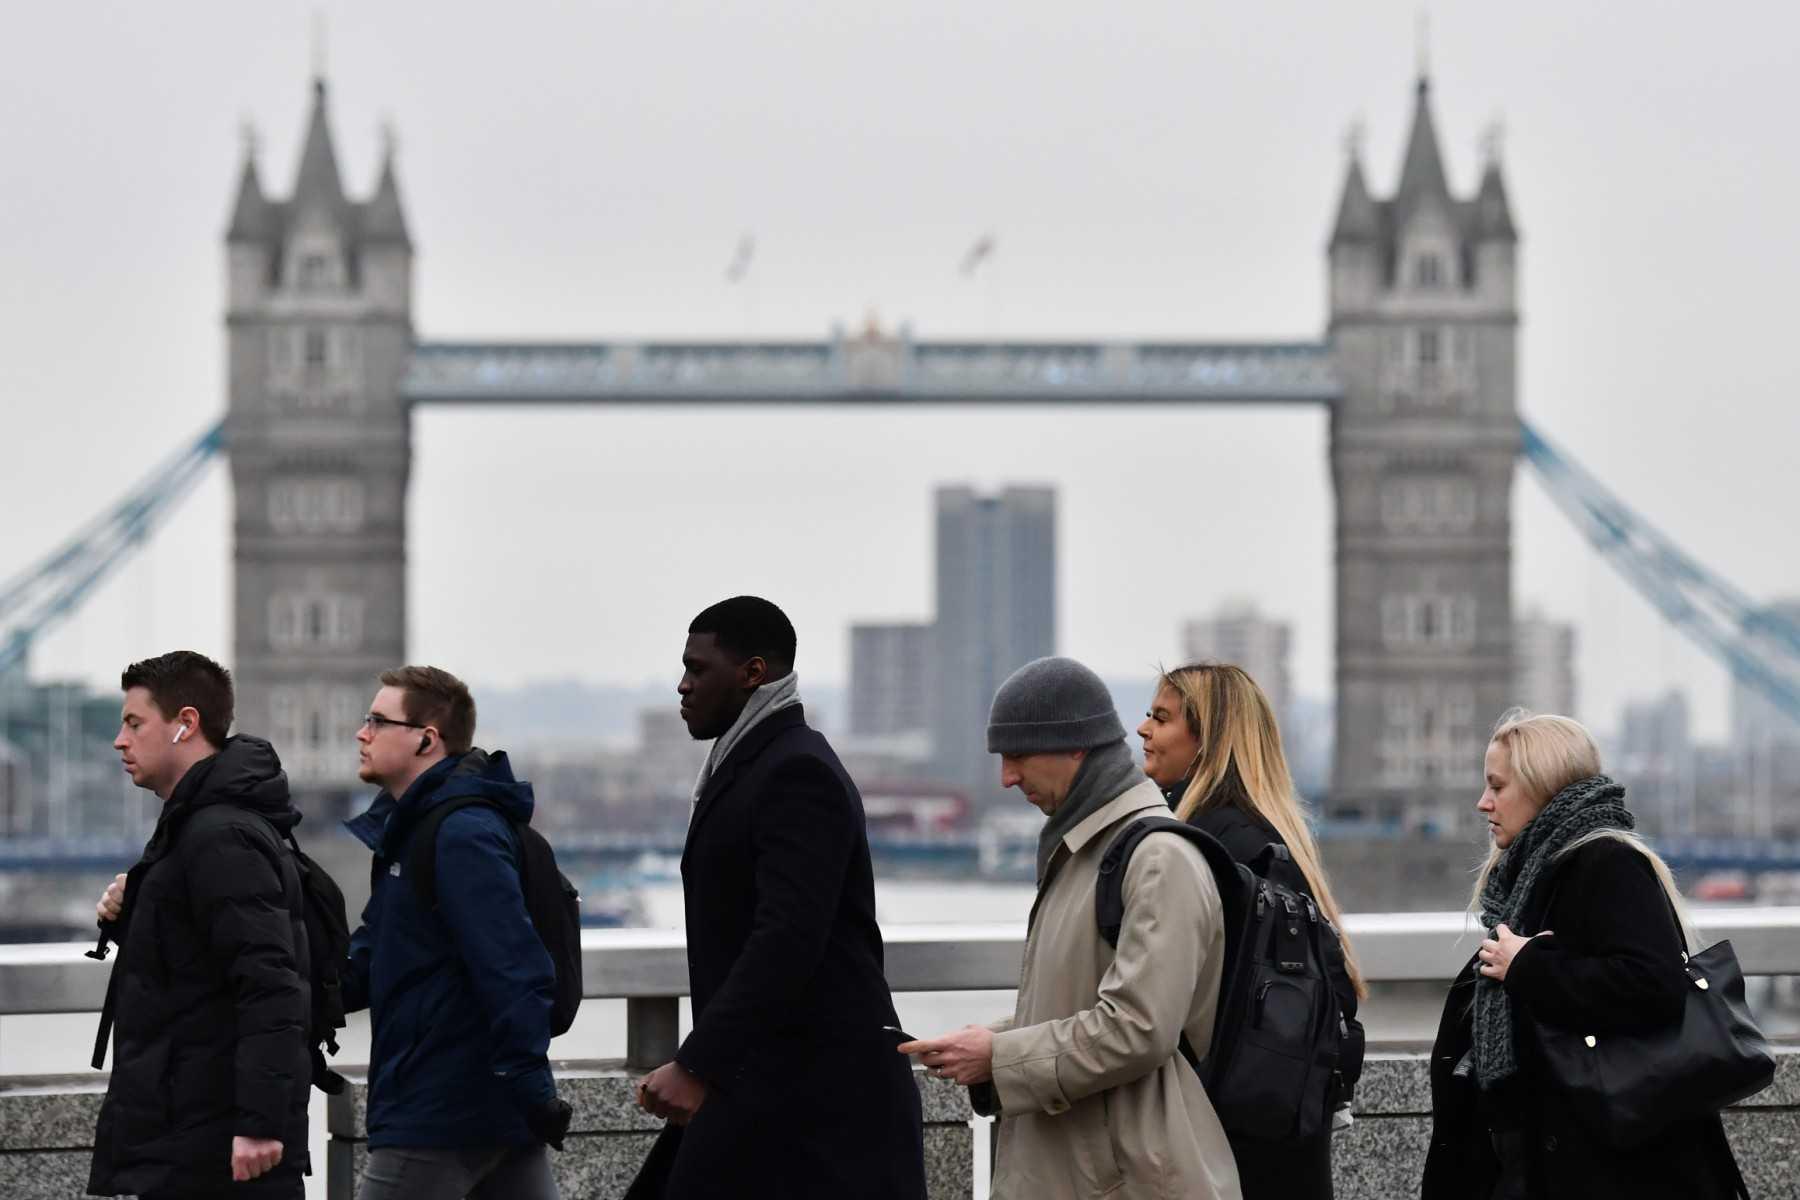 Pedestrians on their way to work cross the London Bridge backdropped by the Tower Bridge in central London on Jan 27. Photo: AFP 